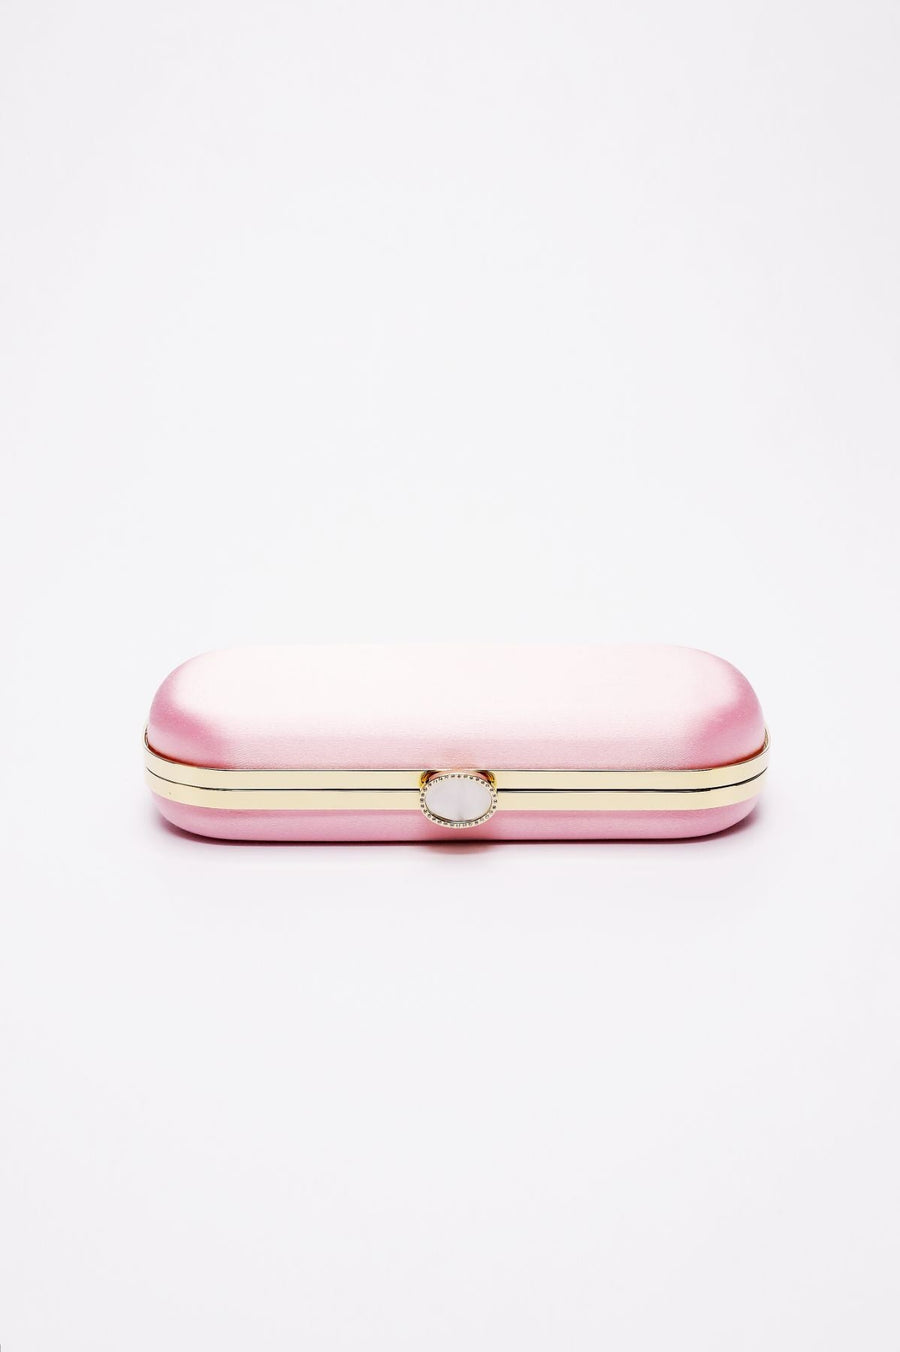 Top closed view of Bella Clutch in Pink Sky satin with silver hardware frame.